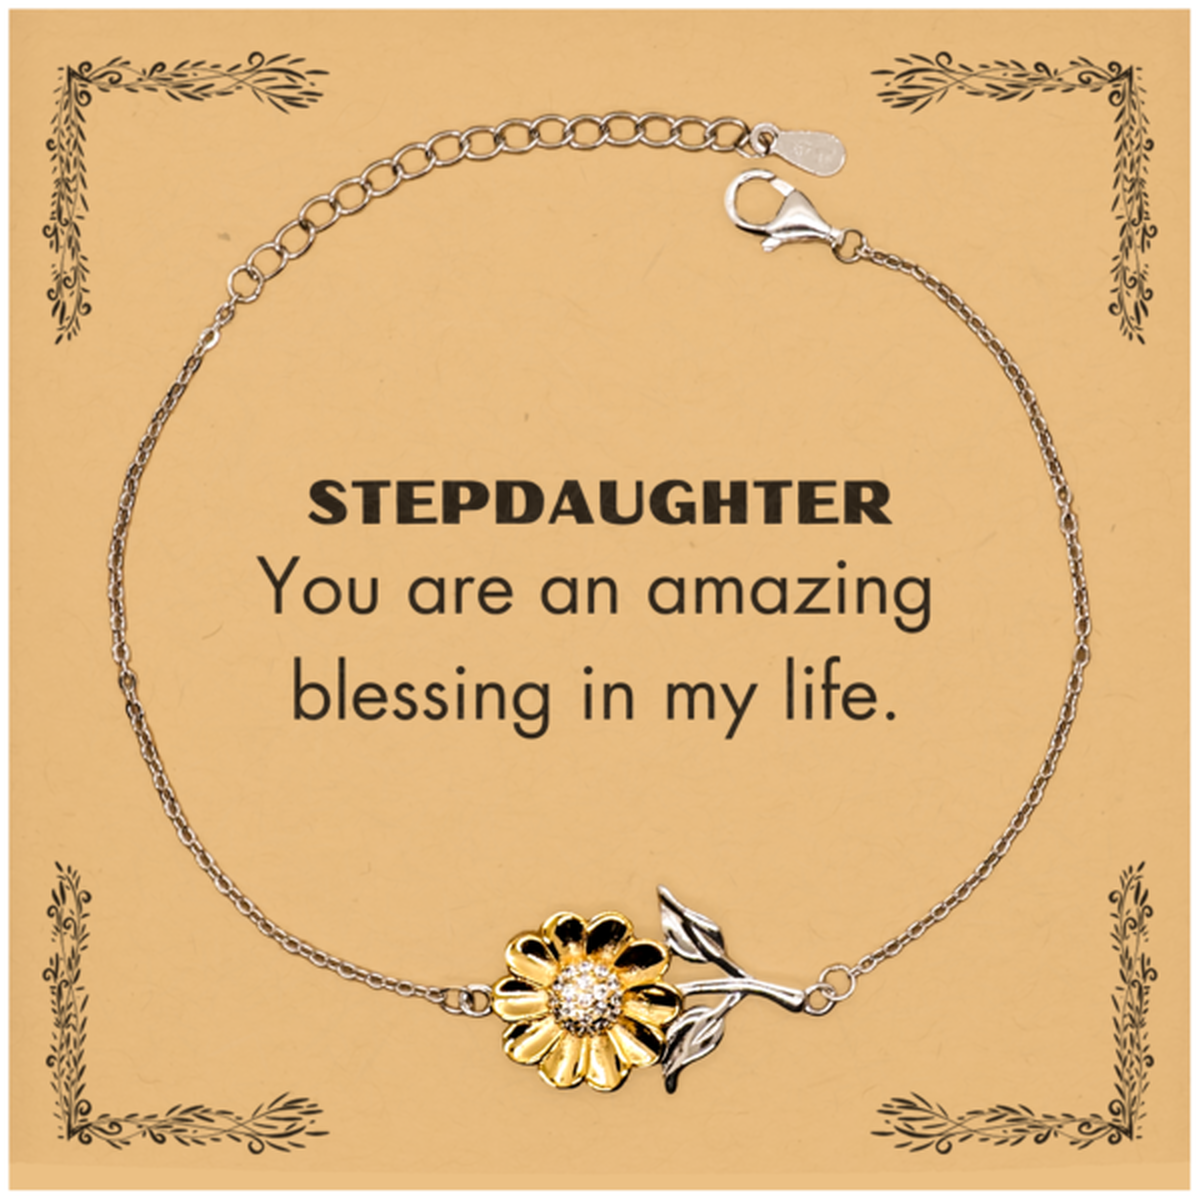 Stepdaughter Sunflower Bracelet, You are an amazing blessing in my life, Thank You Gifts For Stepdaughter, Inspirational Birthday Christmas Unique Gifts For Stepdaughter